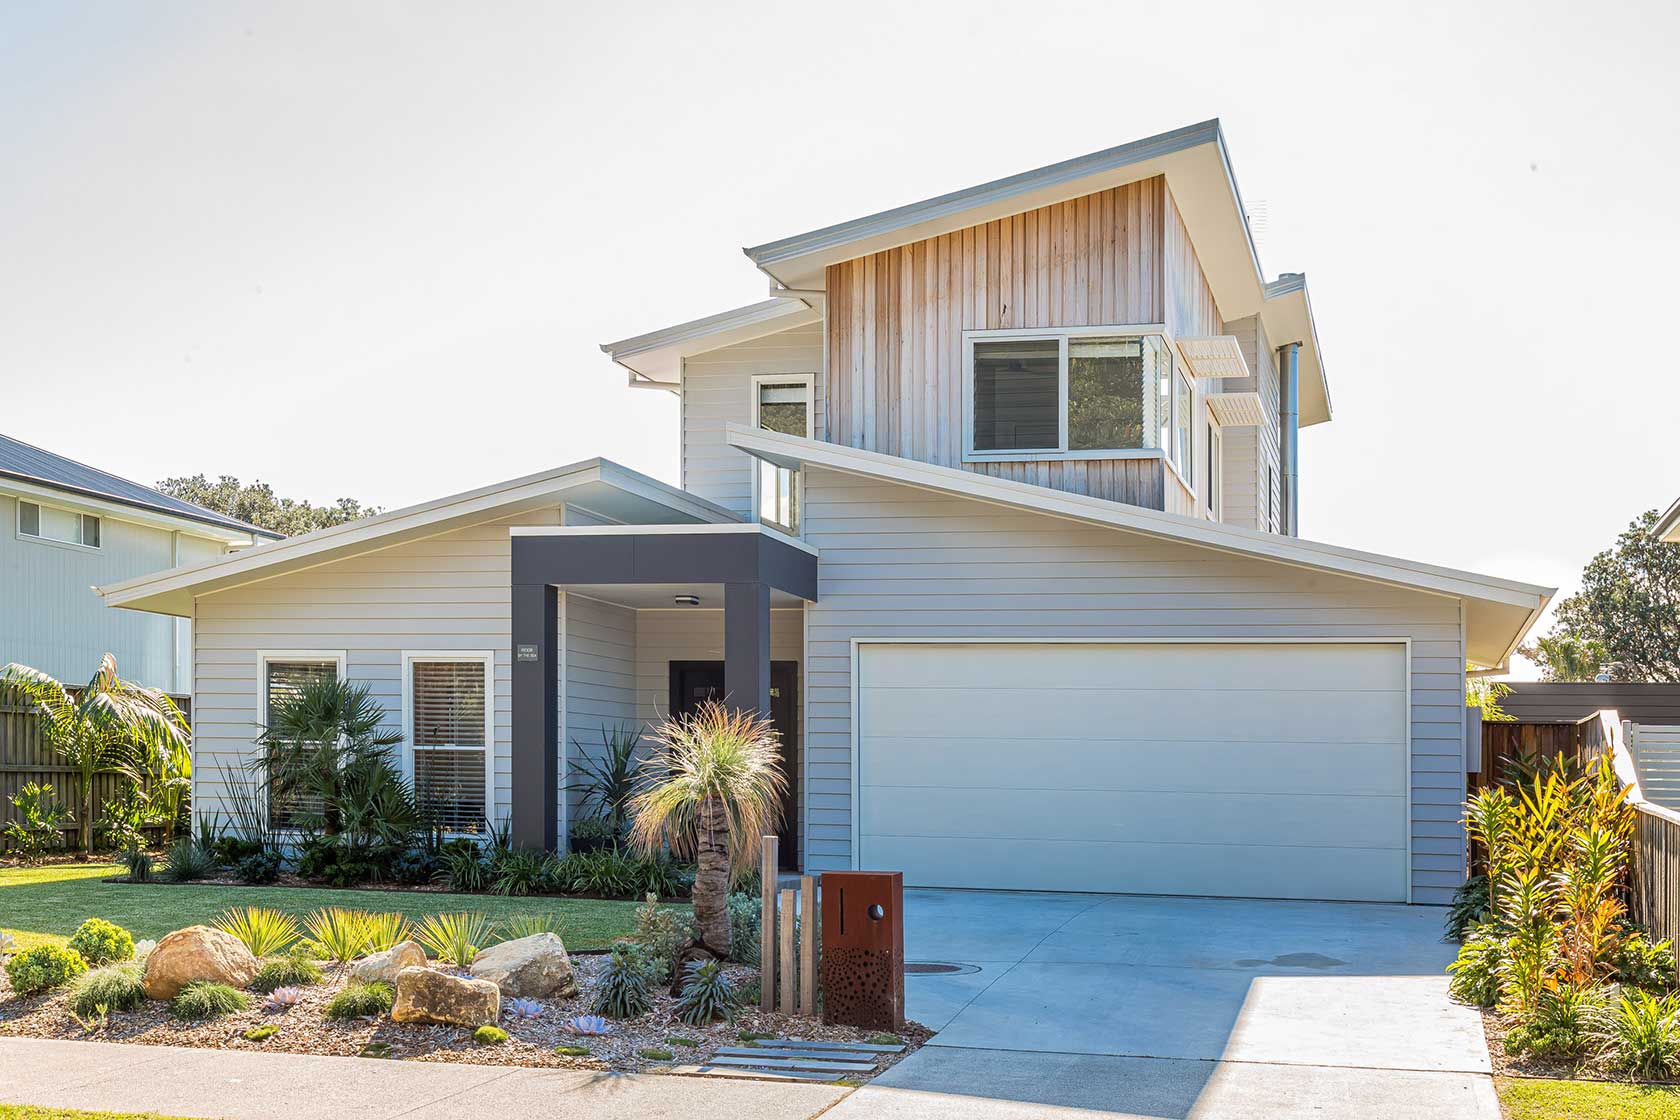 Modern two storey beach-style home with an open plan feel.